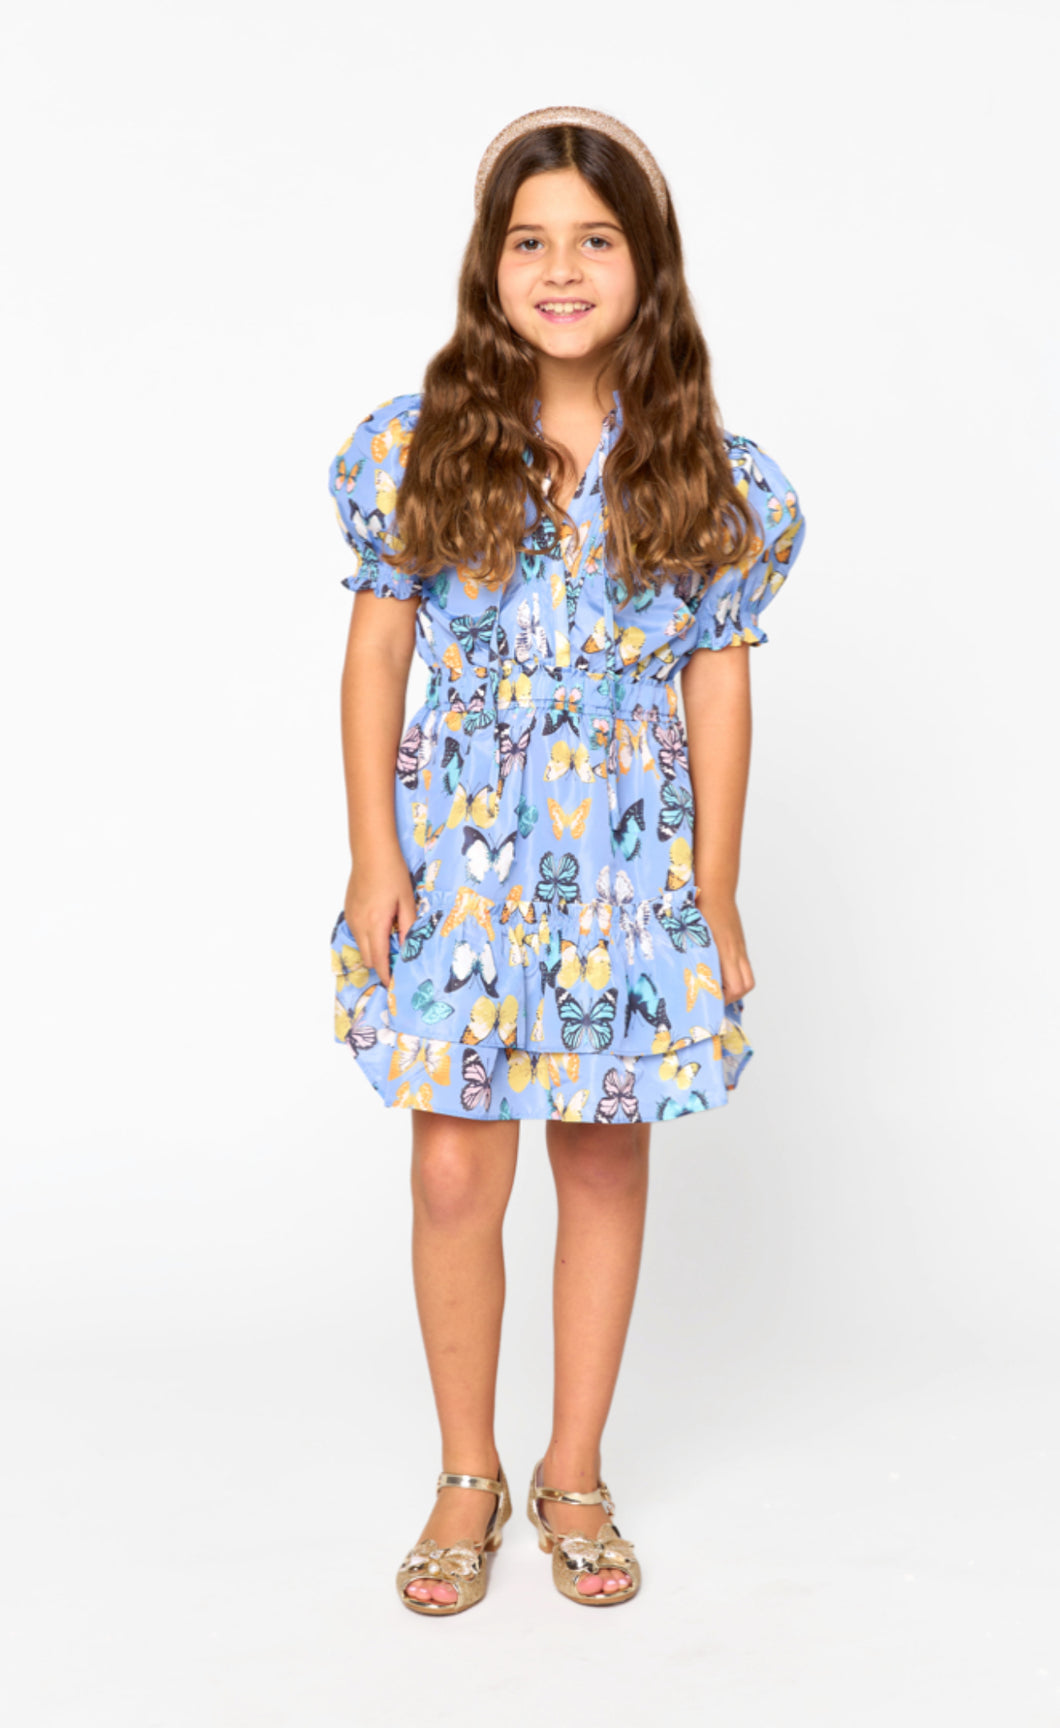 Buddy Love Girls: Clementine Painted Lady Dress